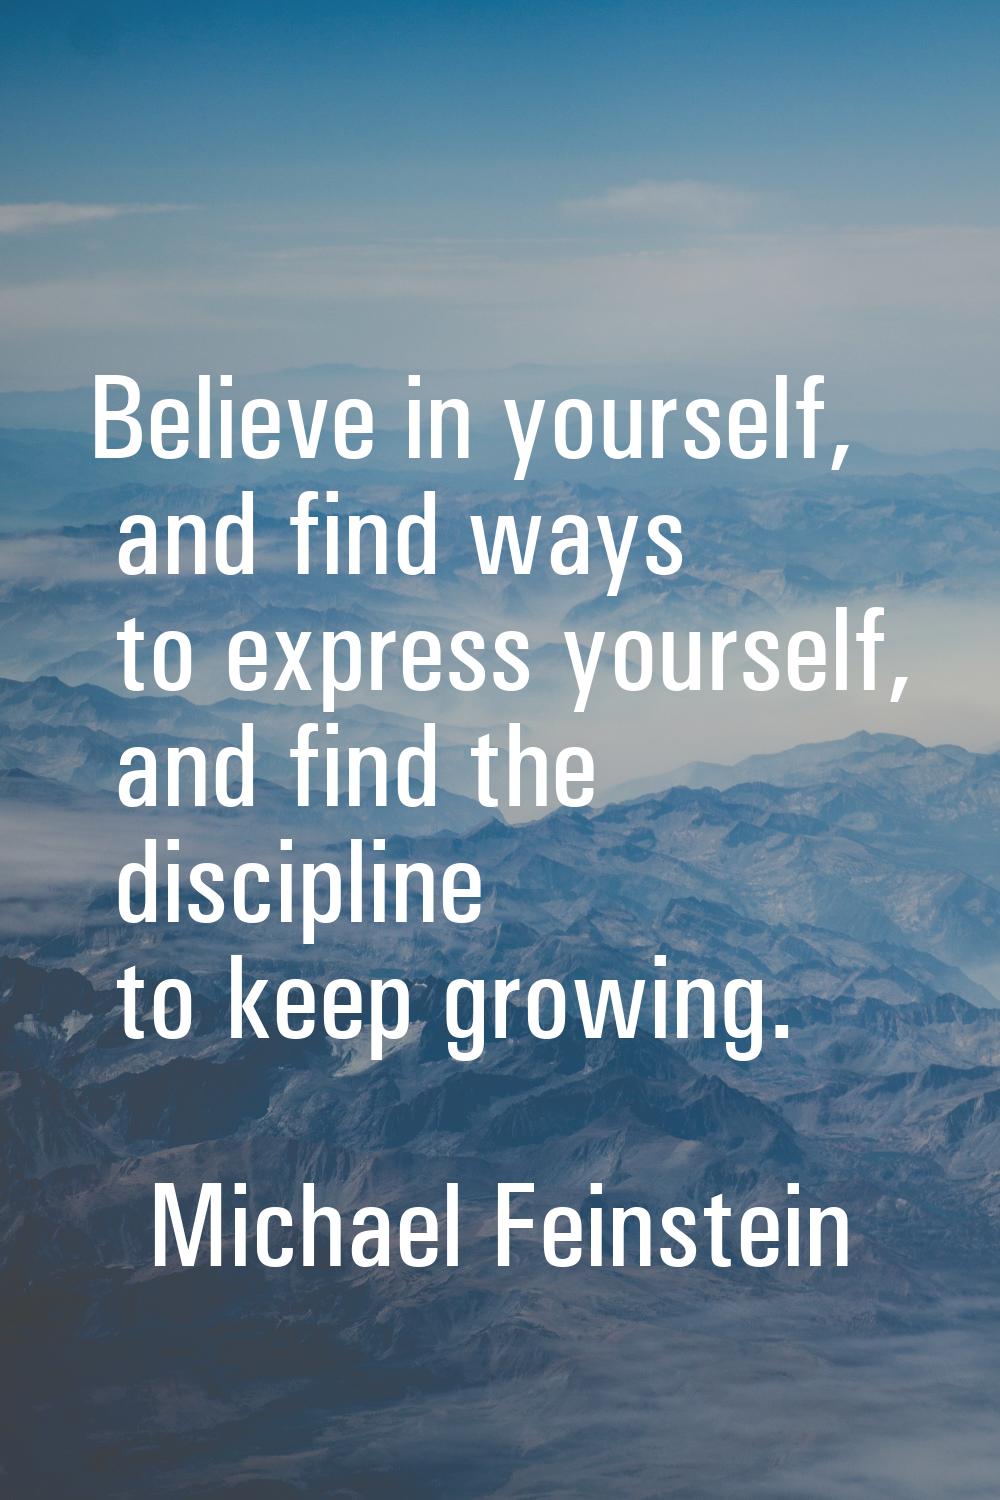 Believe in yourself, and find ways to express yourself, and find the discipline to keep growing.